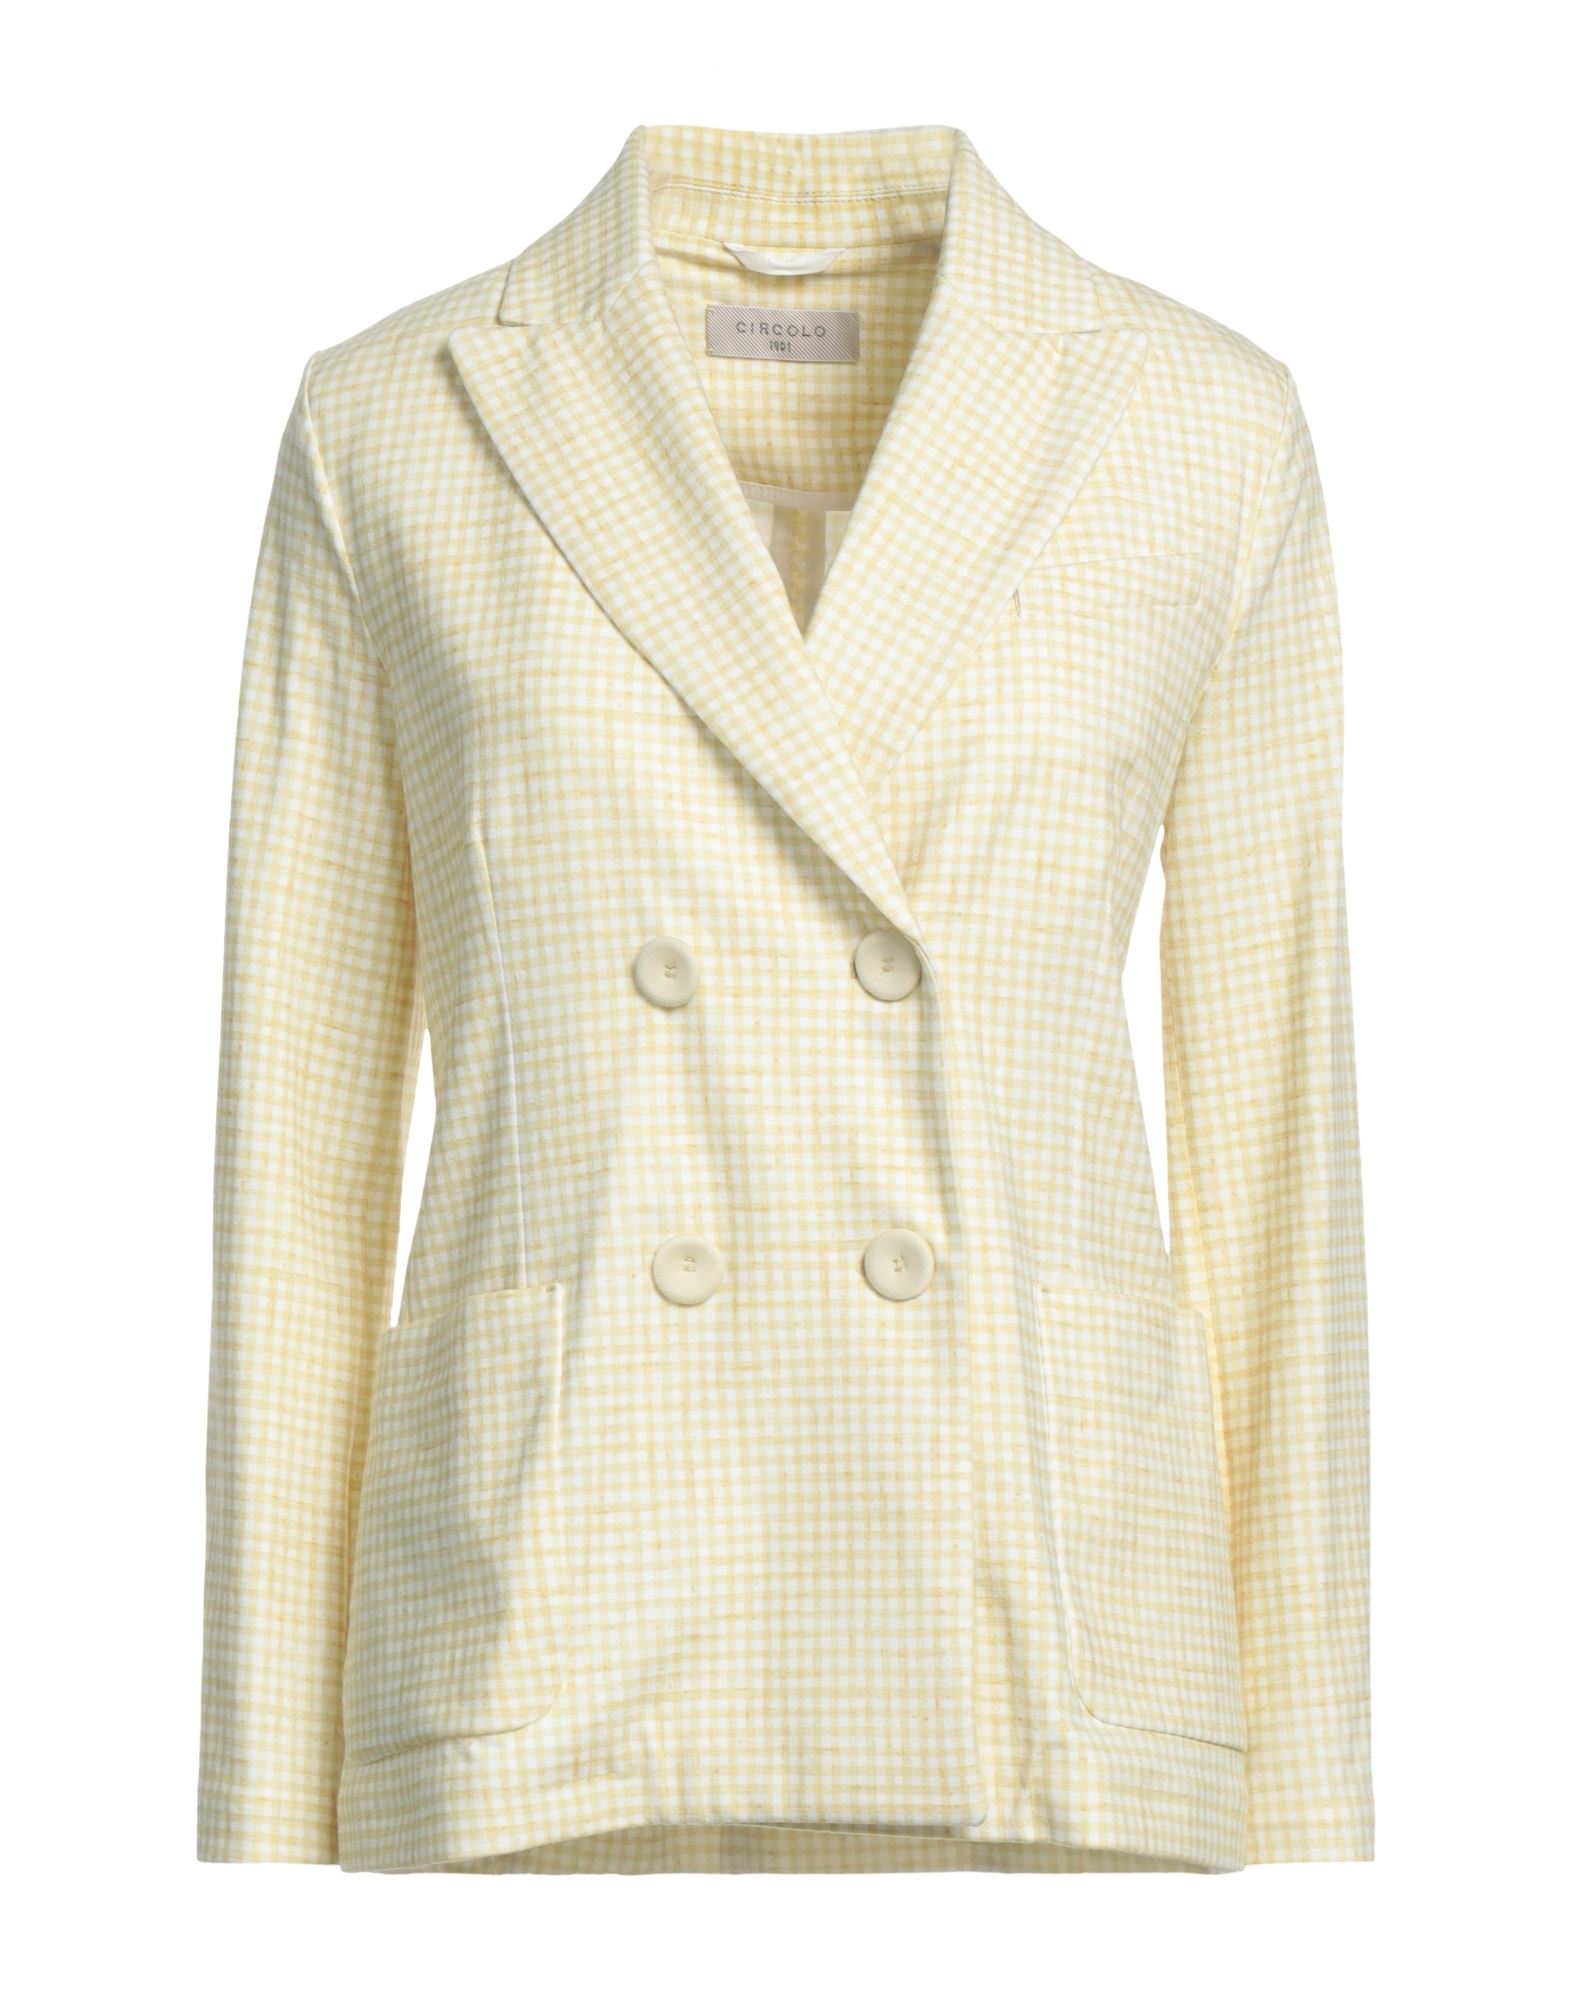 Circolo 1901 Suit Jackets In Yellow